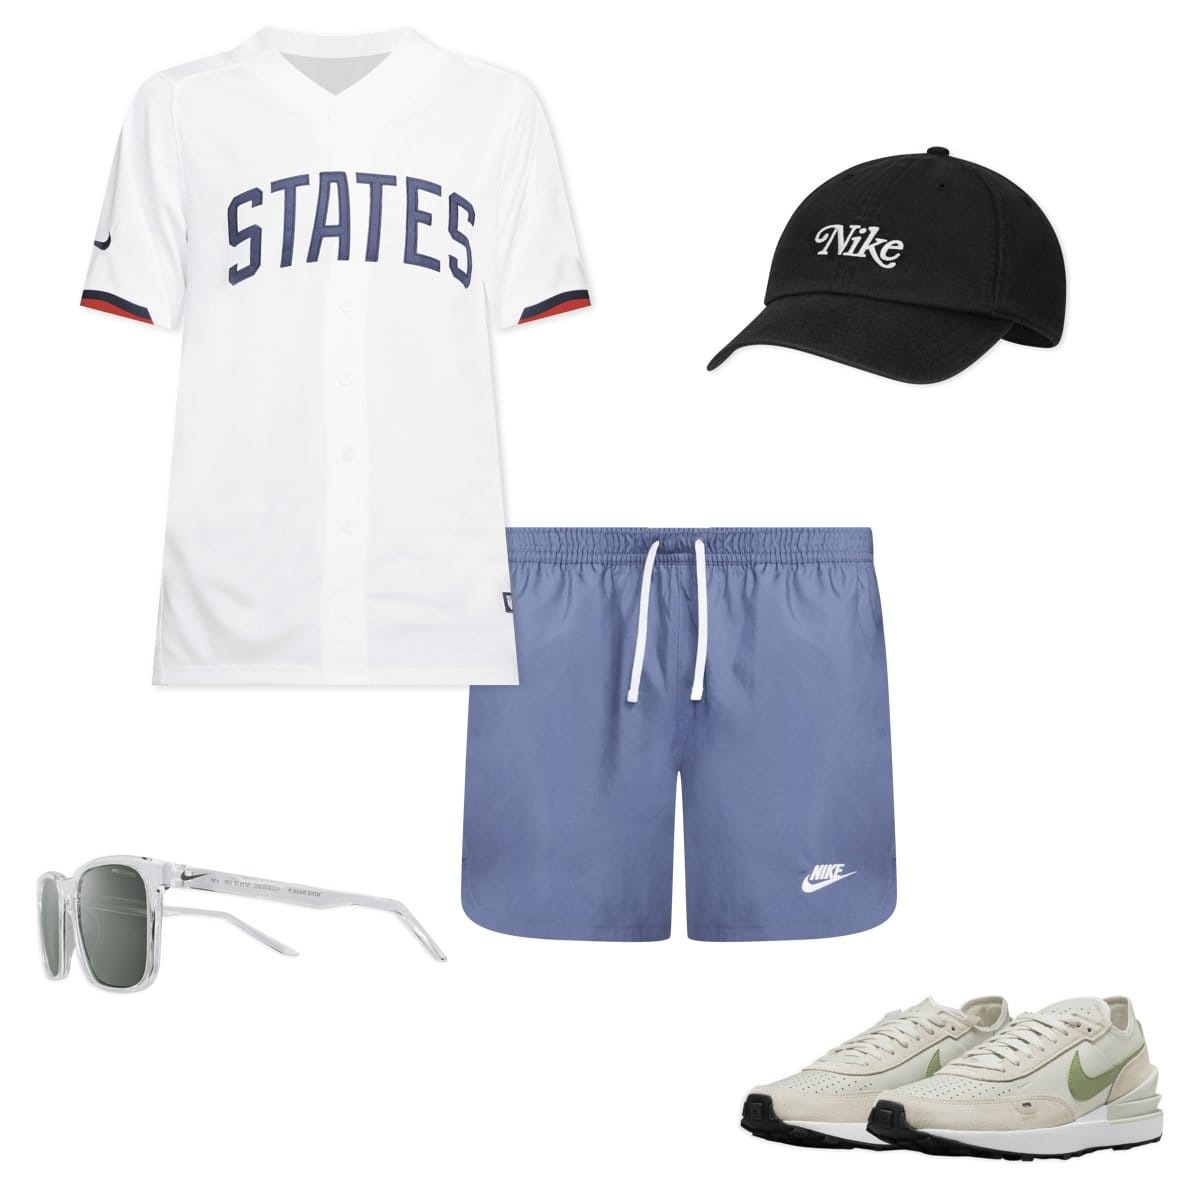 18 Outfit Ideas to Wear to a Baseball Game